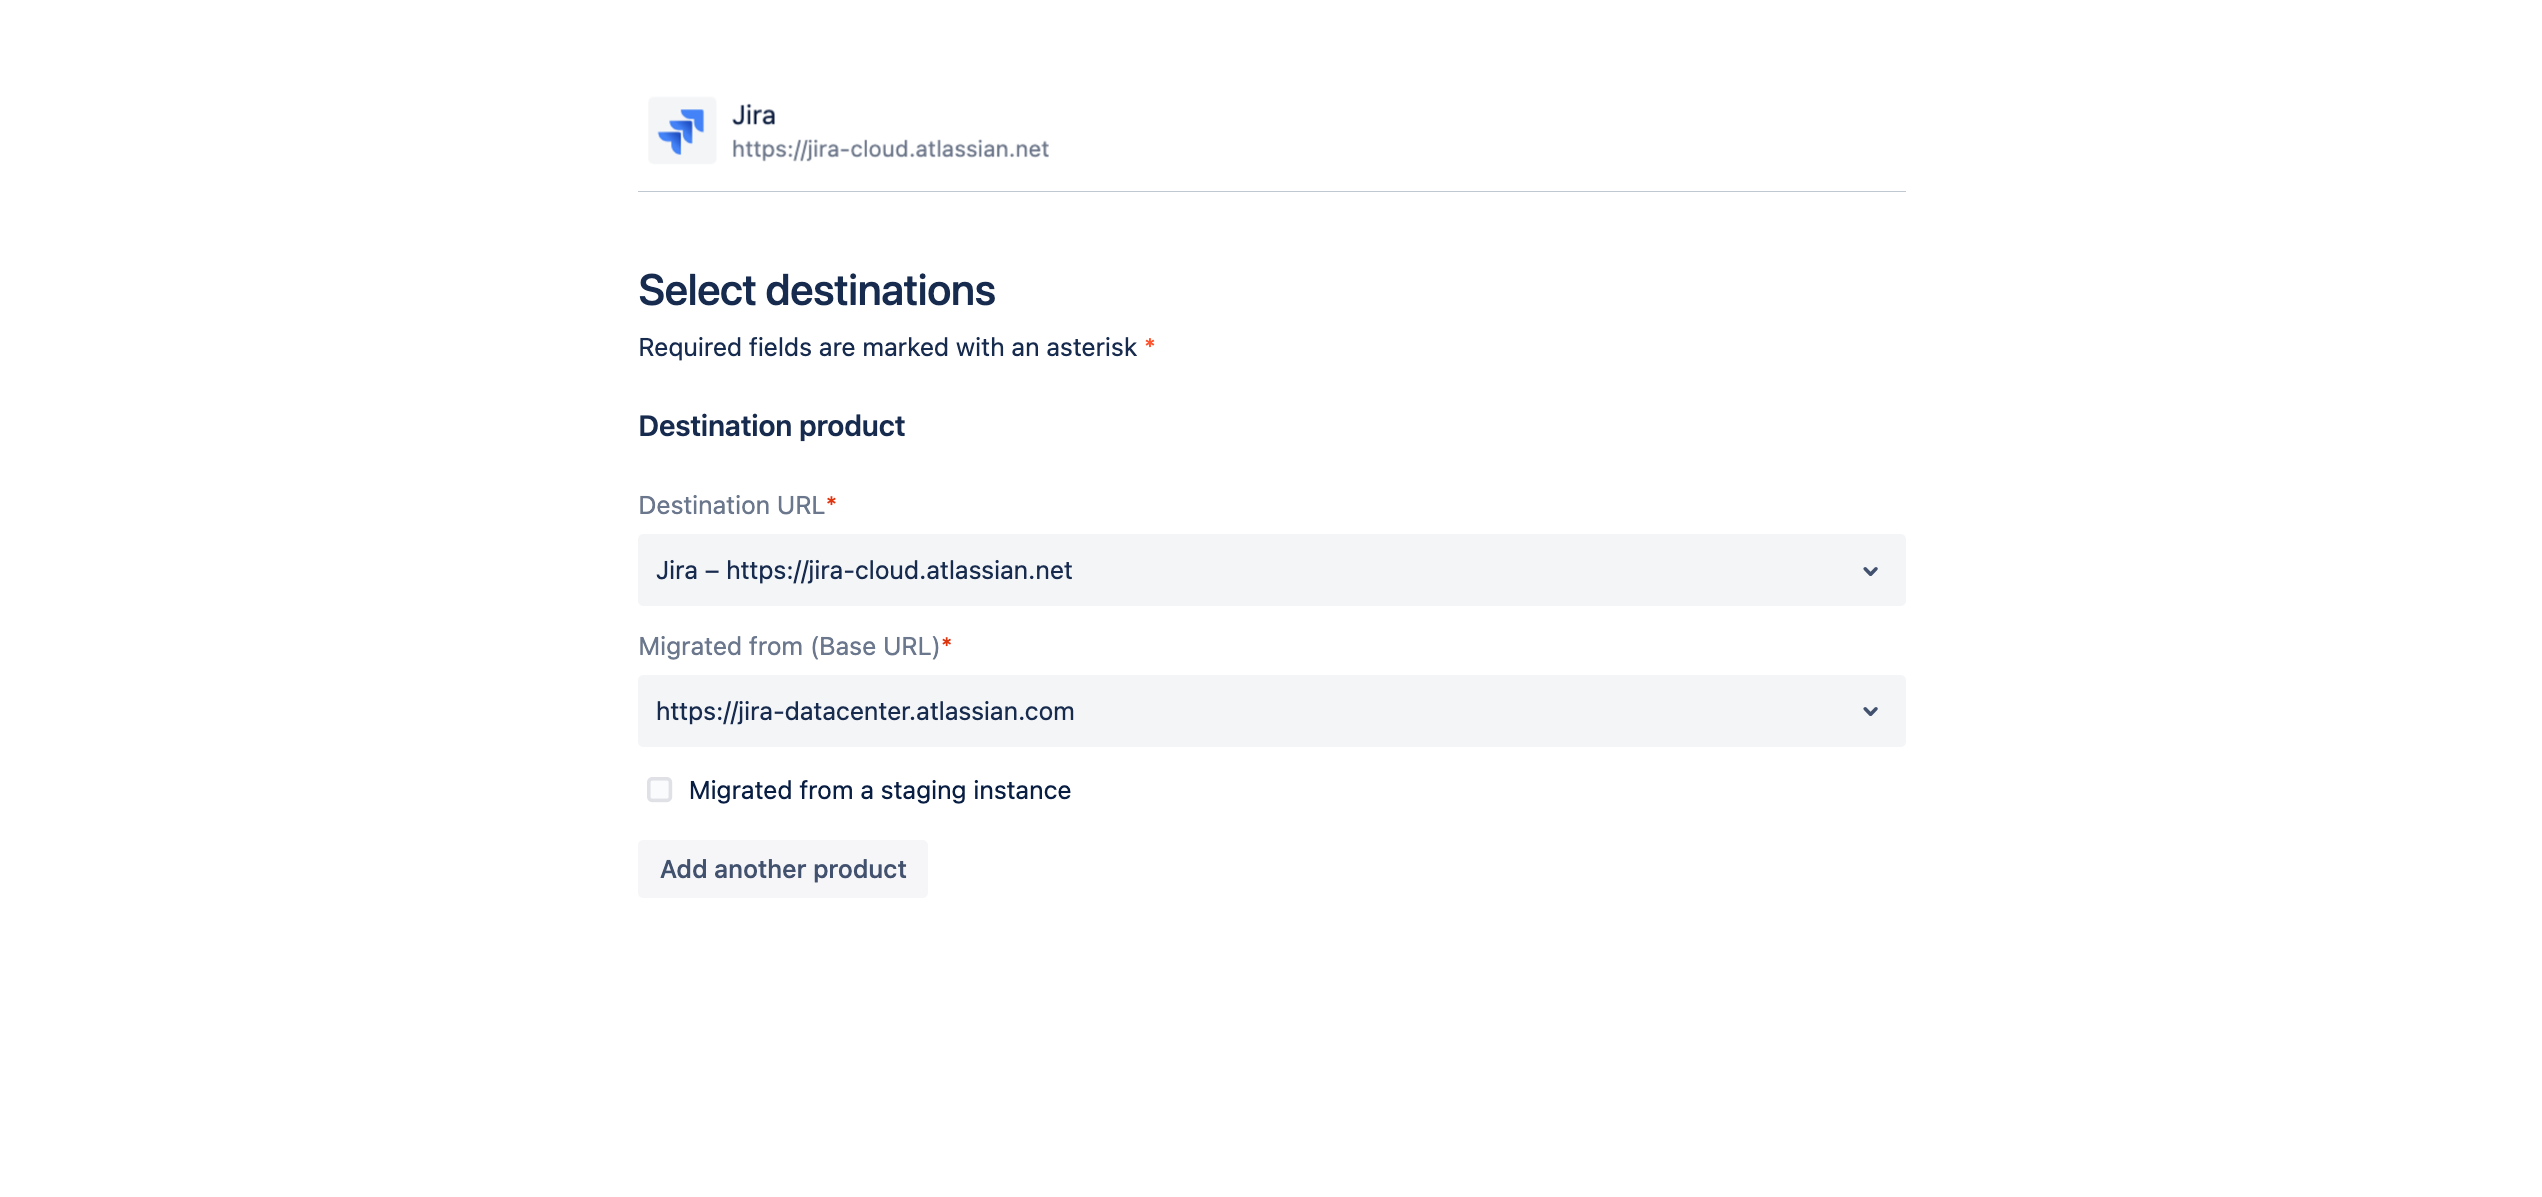 Selecting a new destination for existing links, with Jira selected.